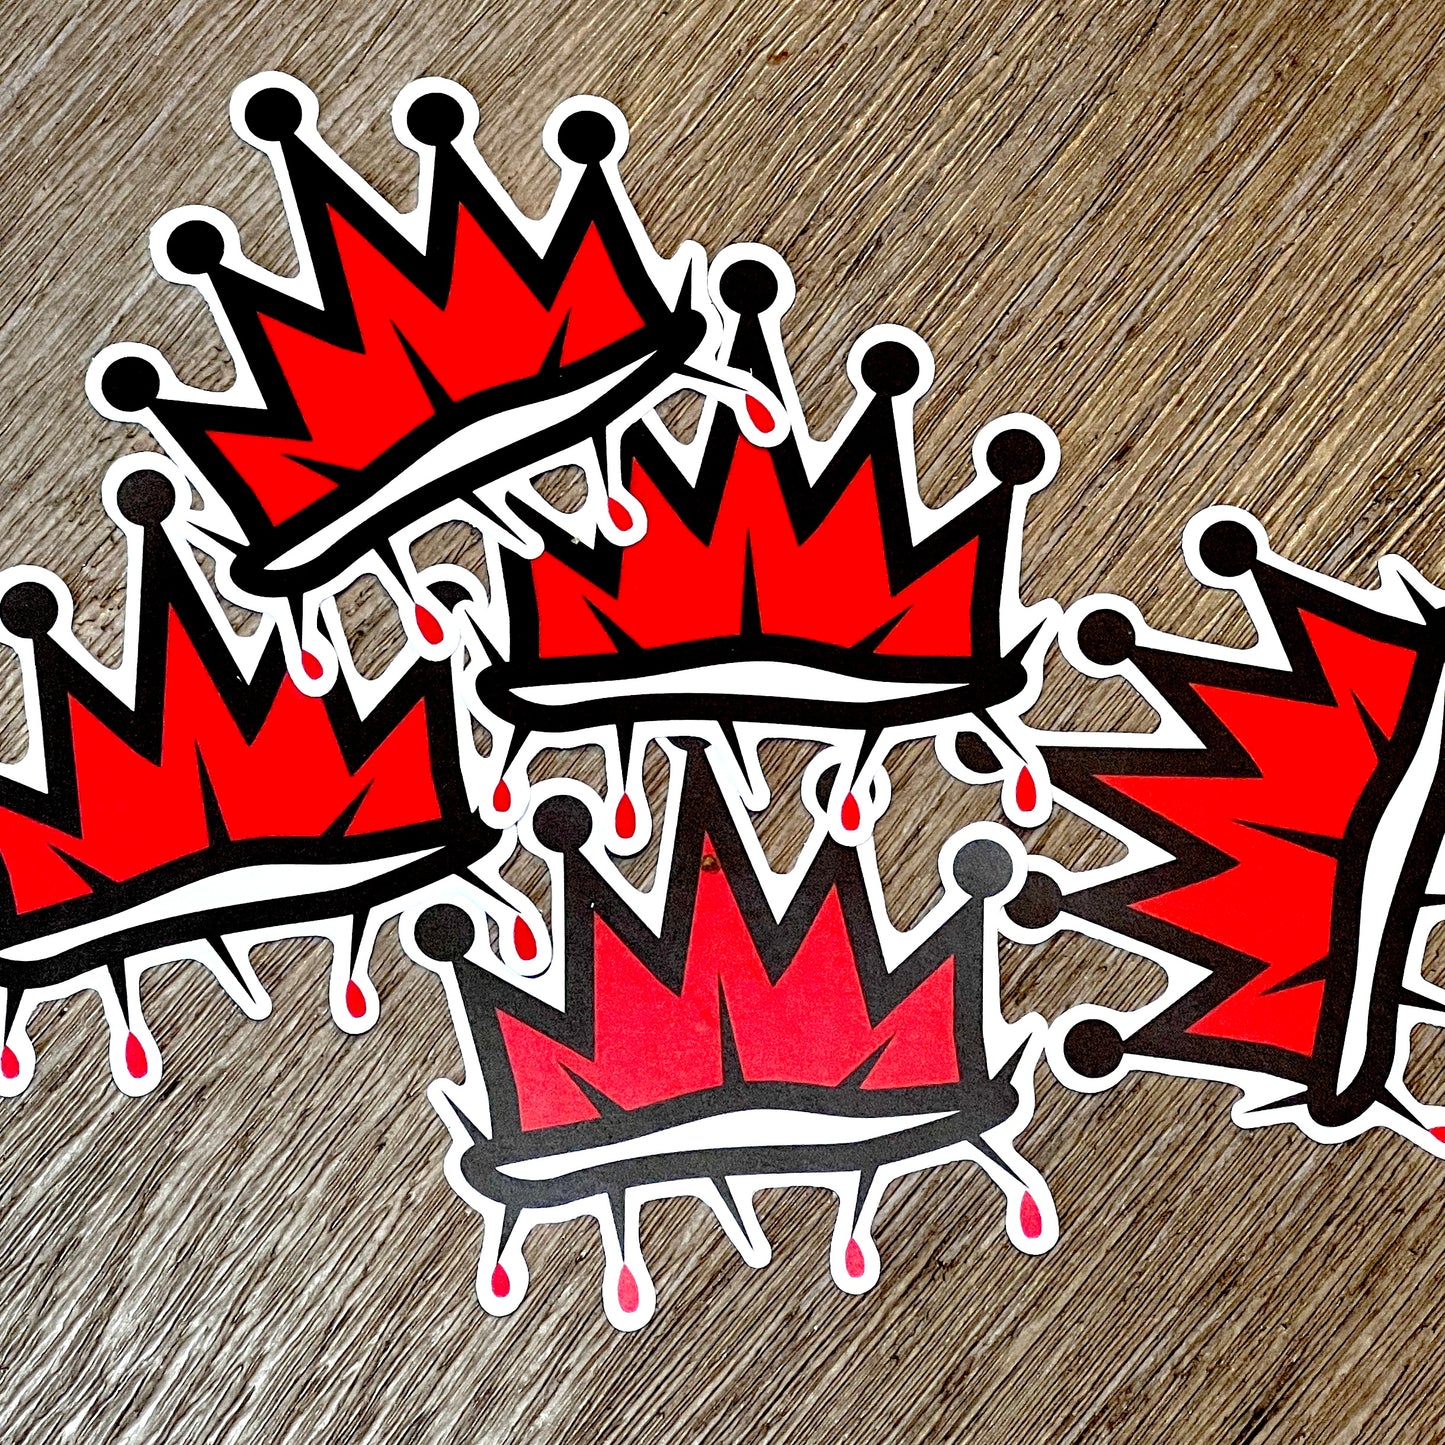 OWG Crown - Sticker (Pack of 3 or 5)